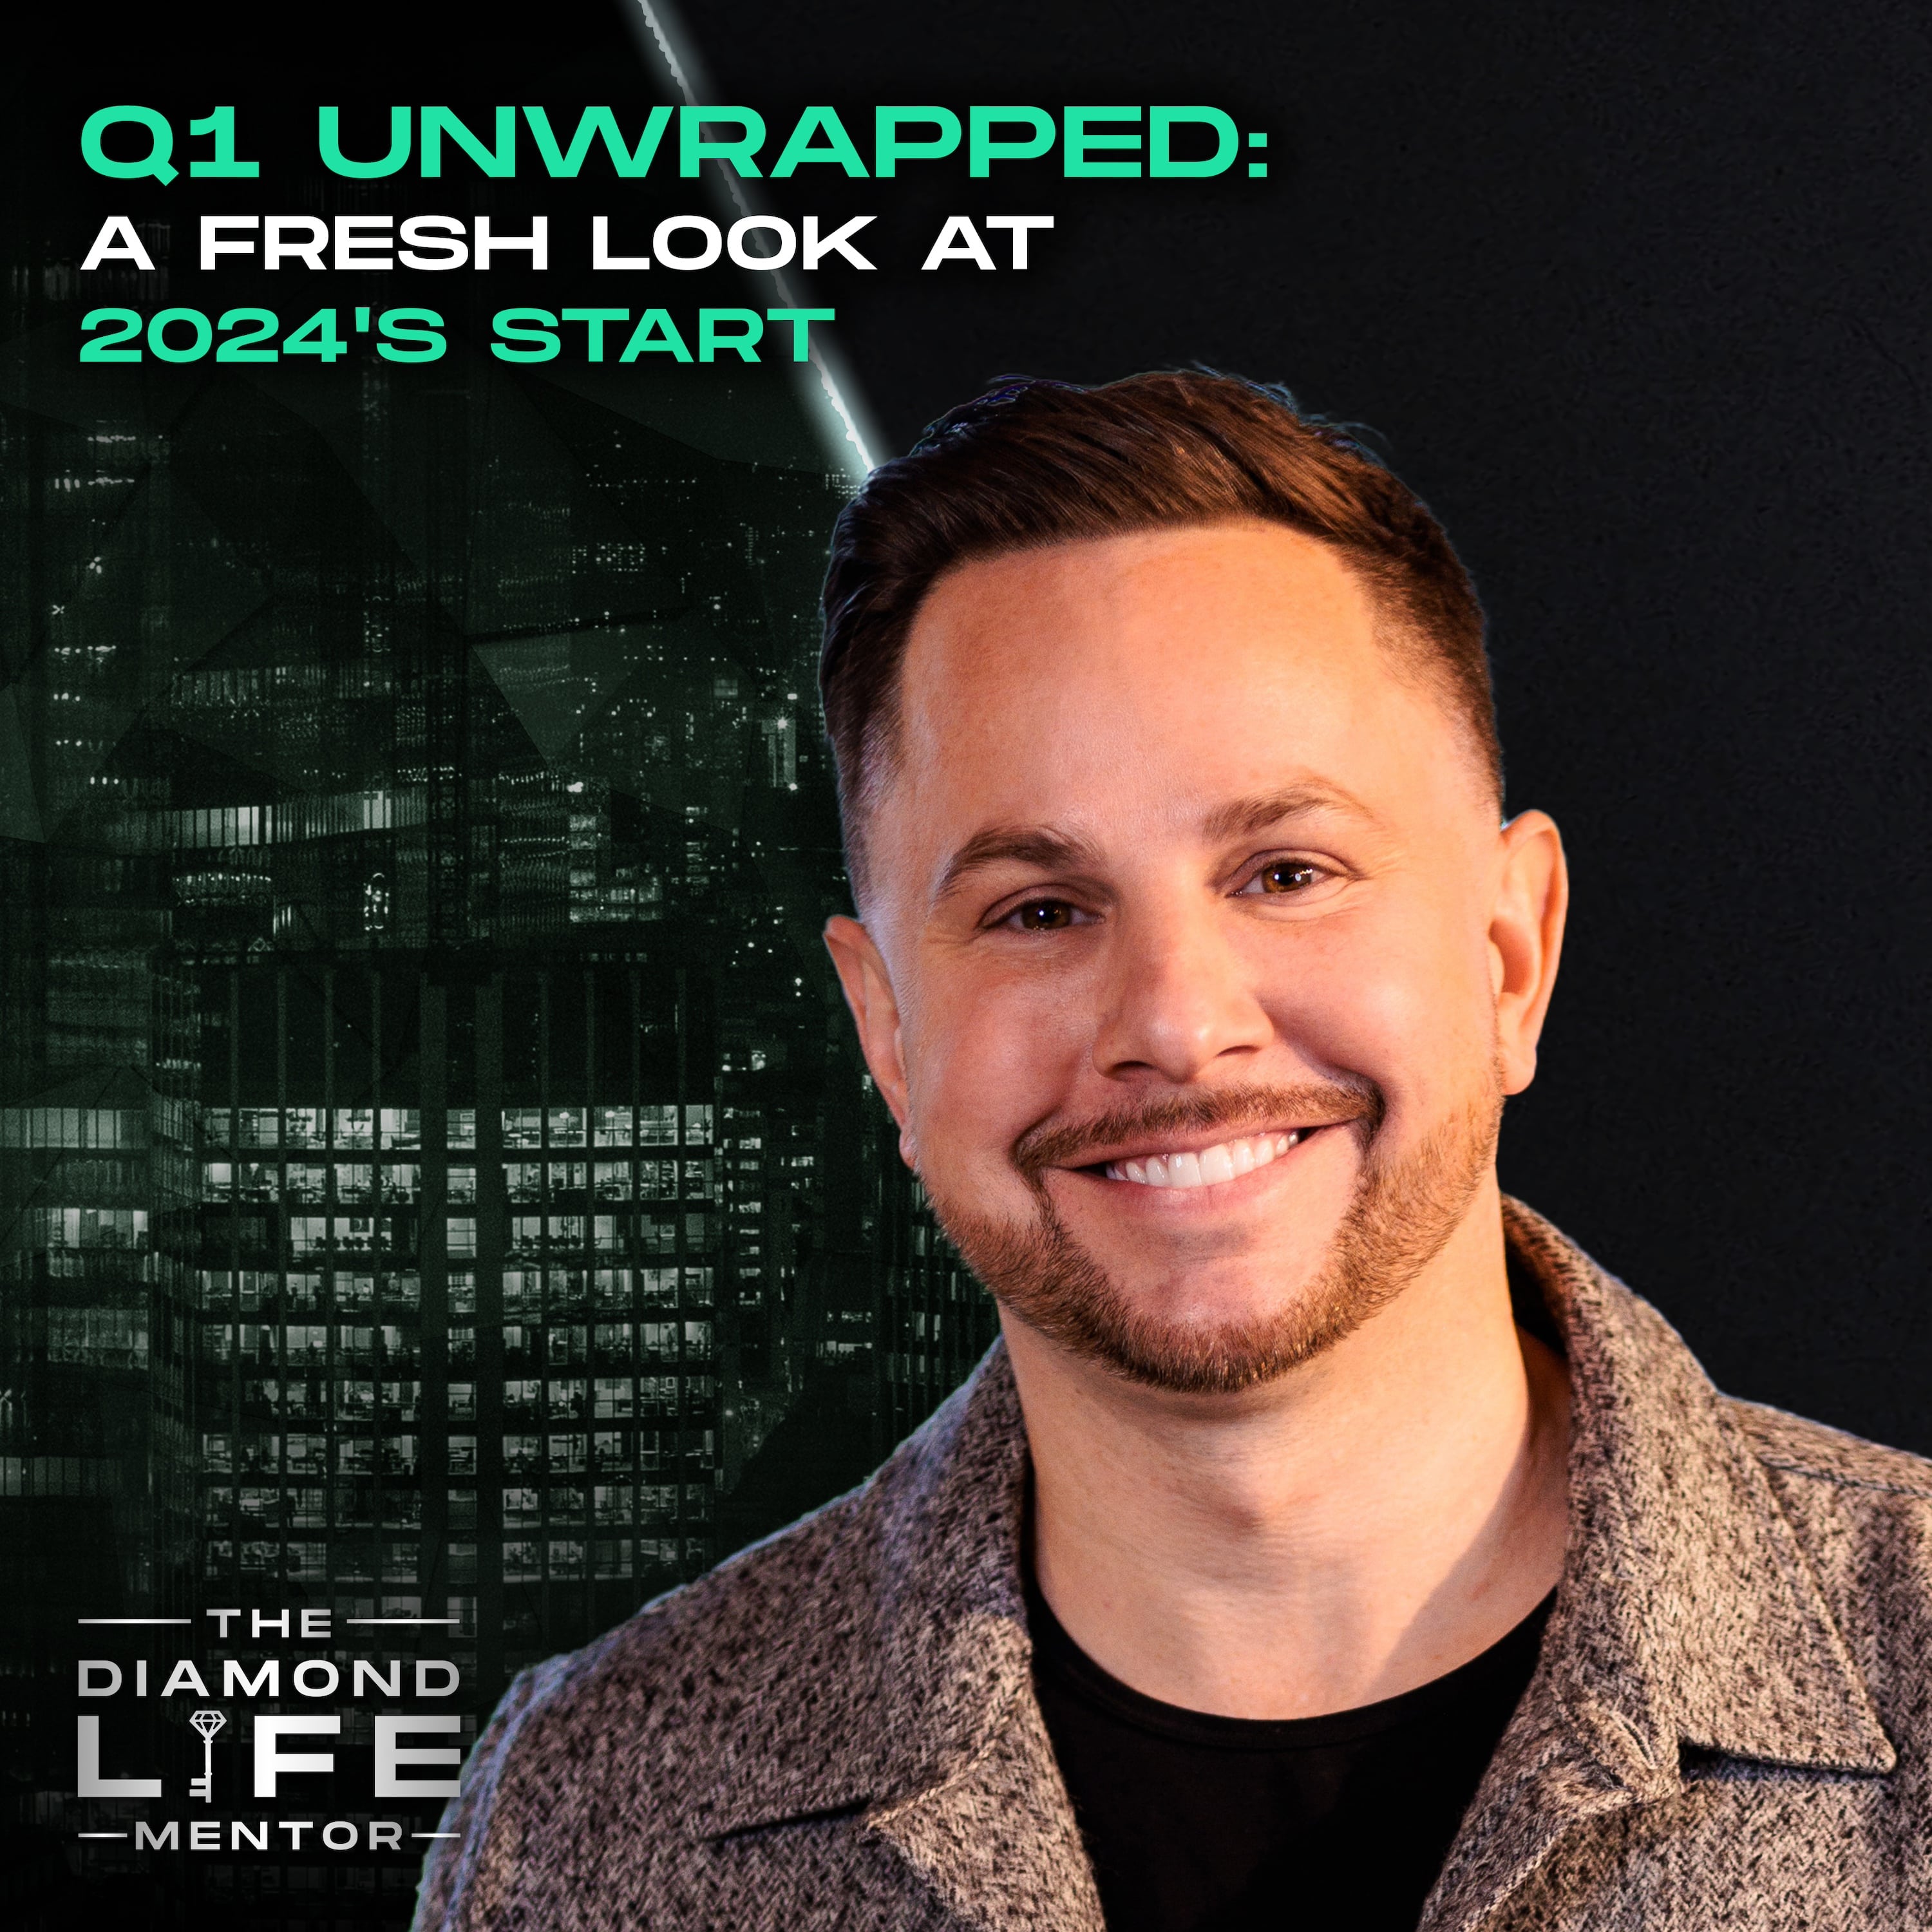 Q1 Unwrapped: A Fresh Look at 2024's Start